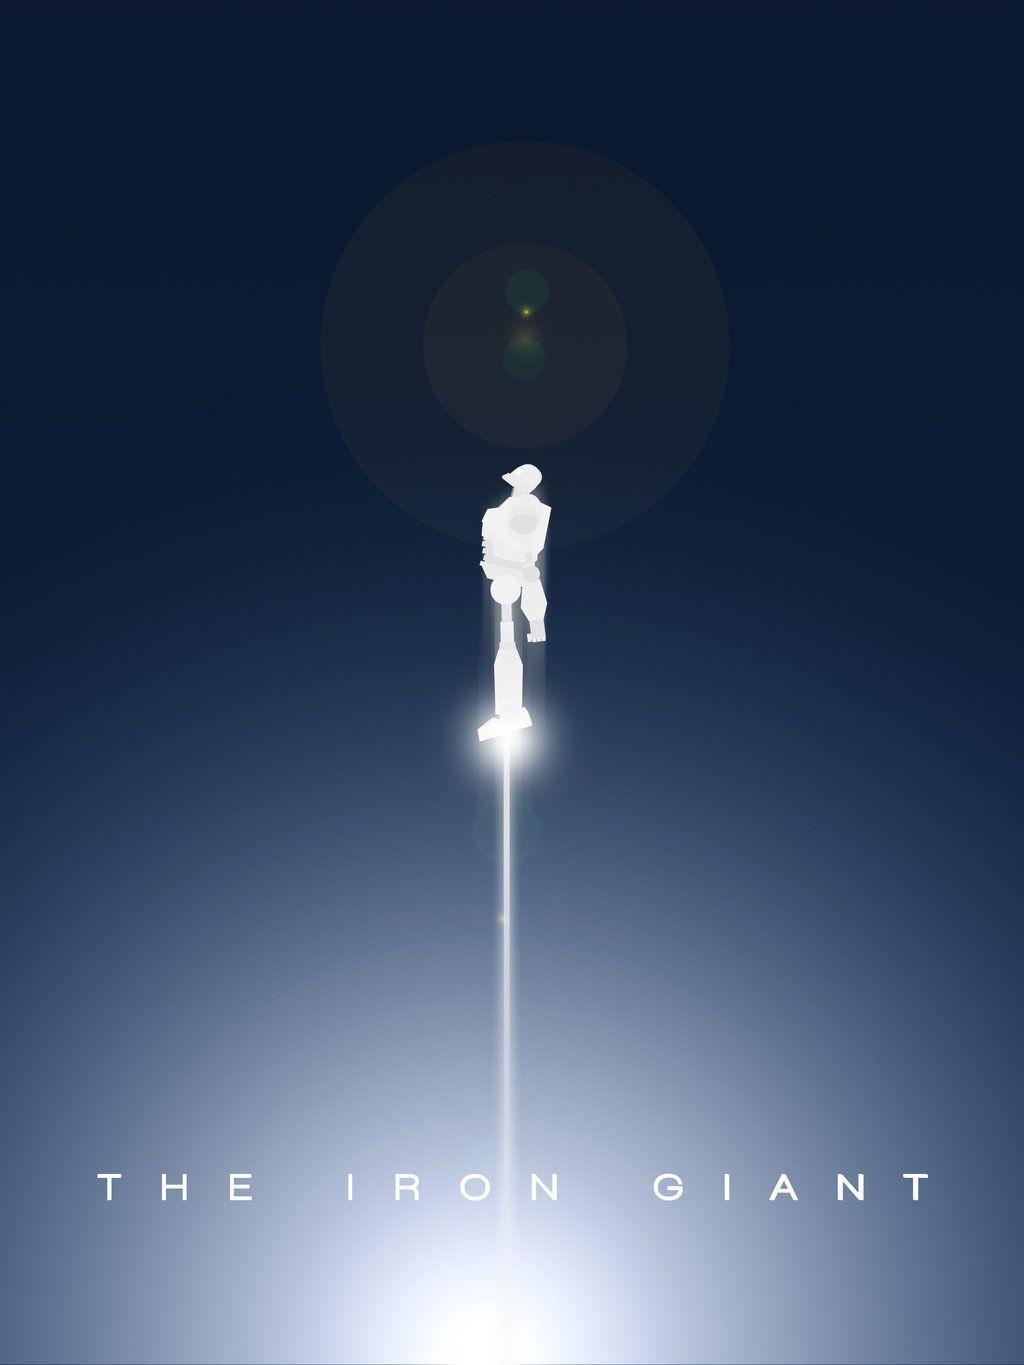 The Iron Giant Wallpaper High Quality